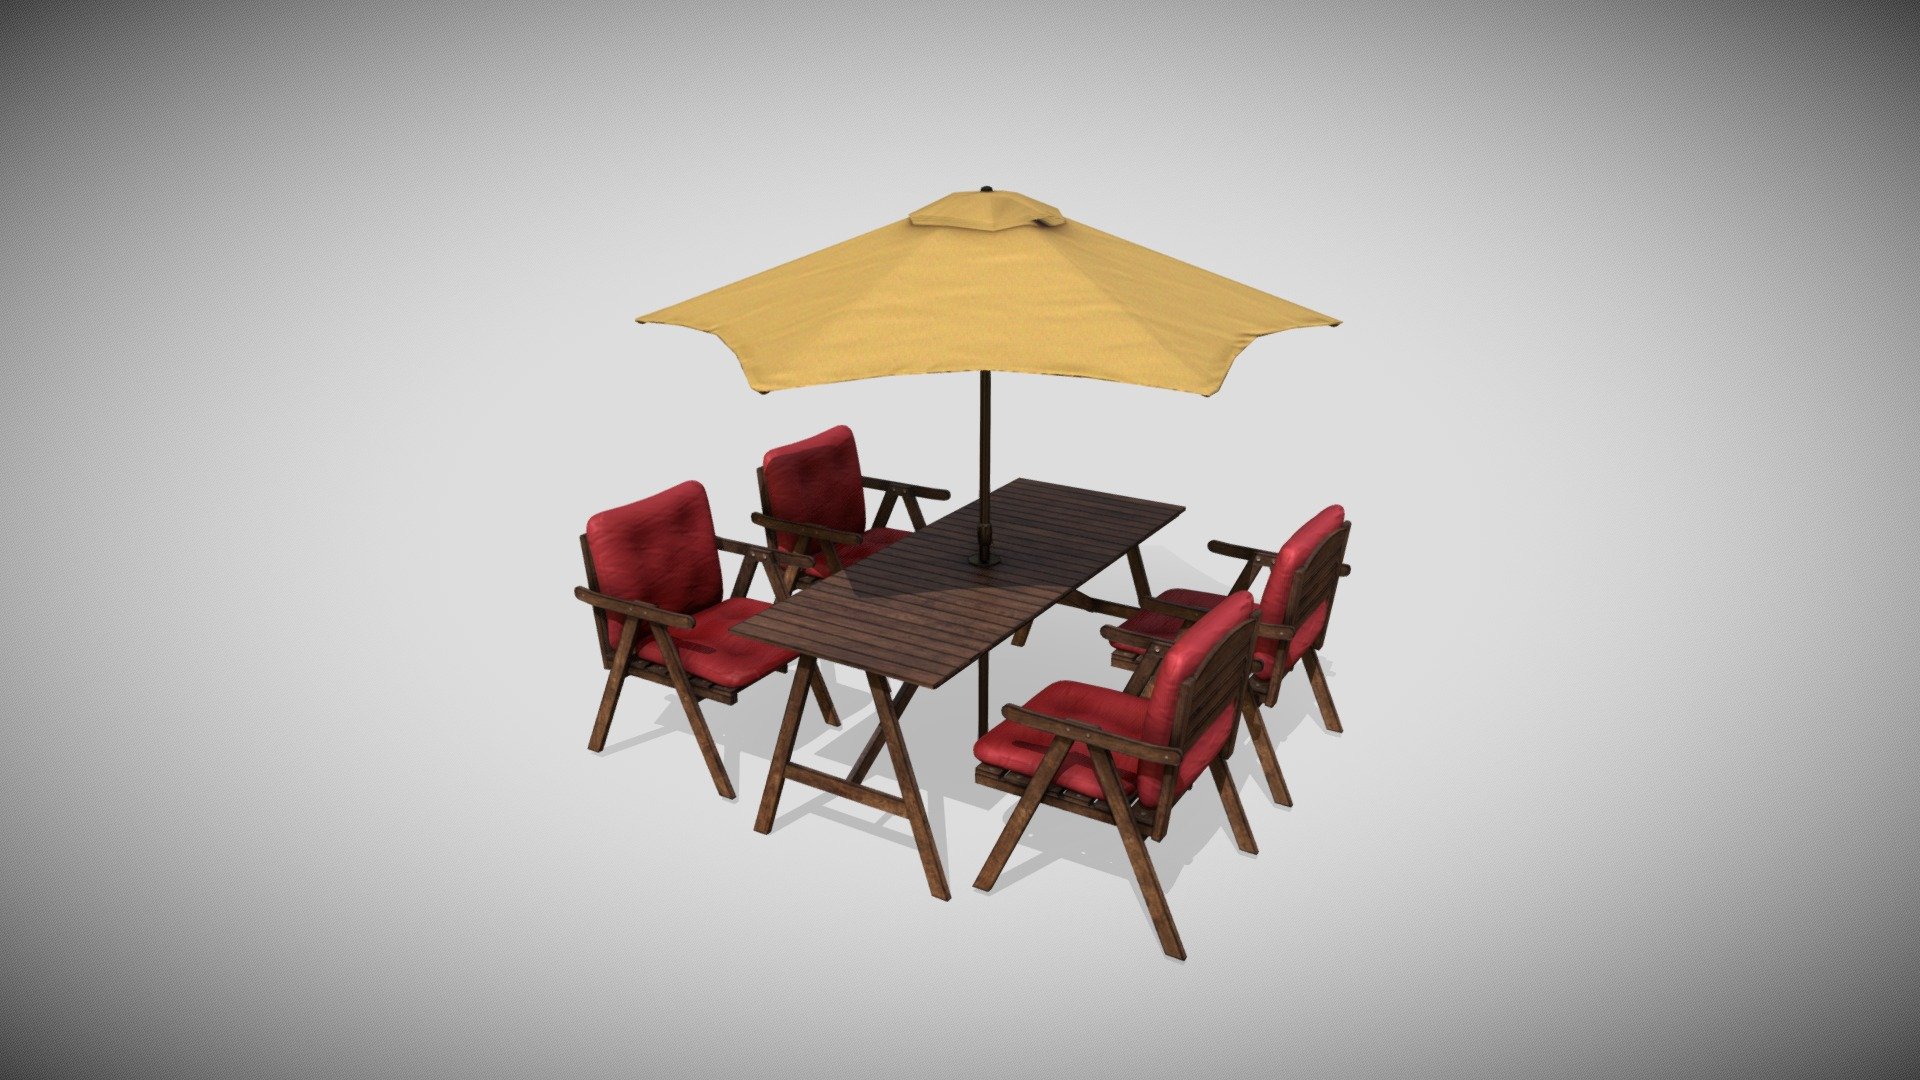 Park table with chairs and umbrella.
Game-ready. Low-poly with PBR materials ( Albedo, Metallic+Roughness+AO, Normal map)
Email: yrayushka@yahoo.com
WEB: https://gest.lt/ - Park table with chairs and umbrella | Game-ready - Buy Royalty Free 3D model by Gest.lt (@gestLT) 3d model